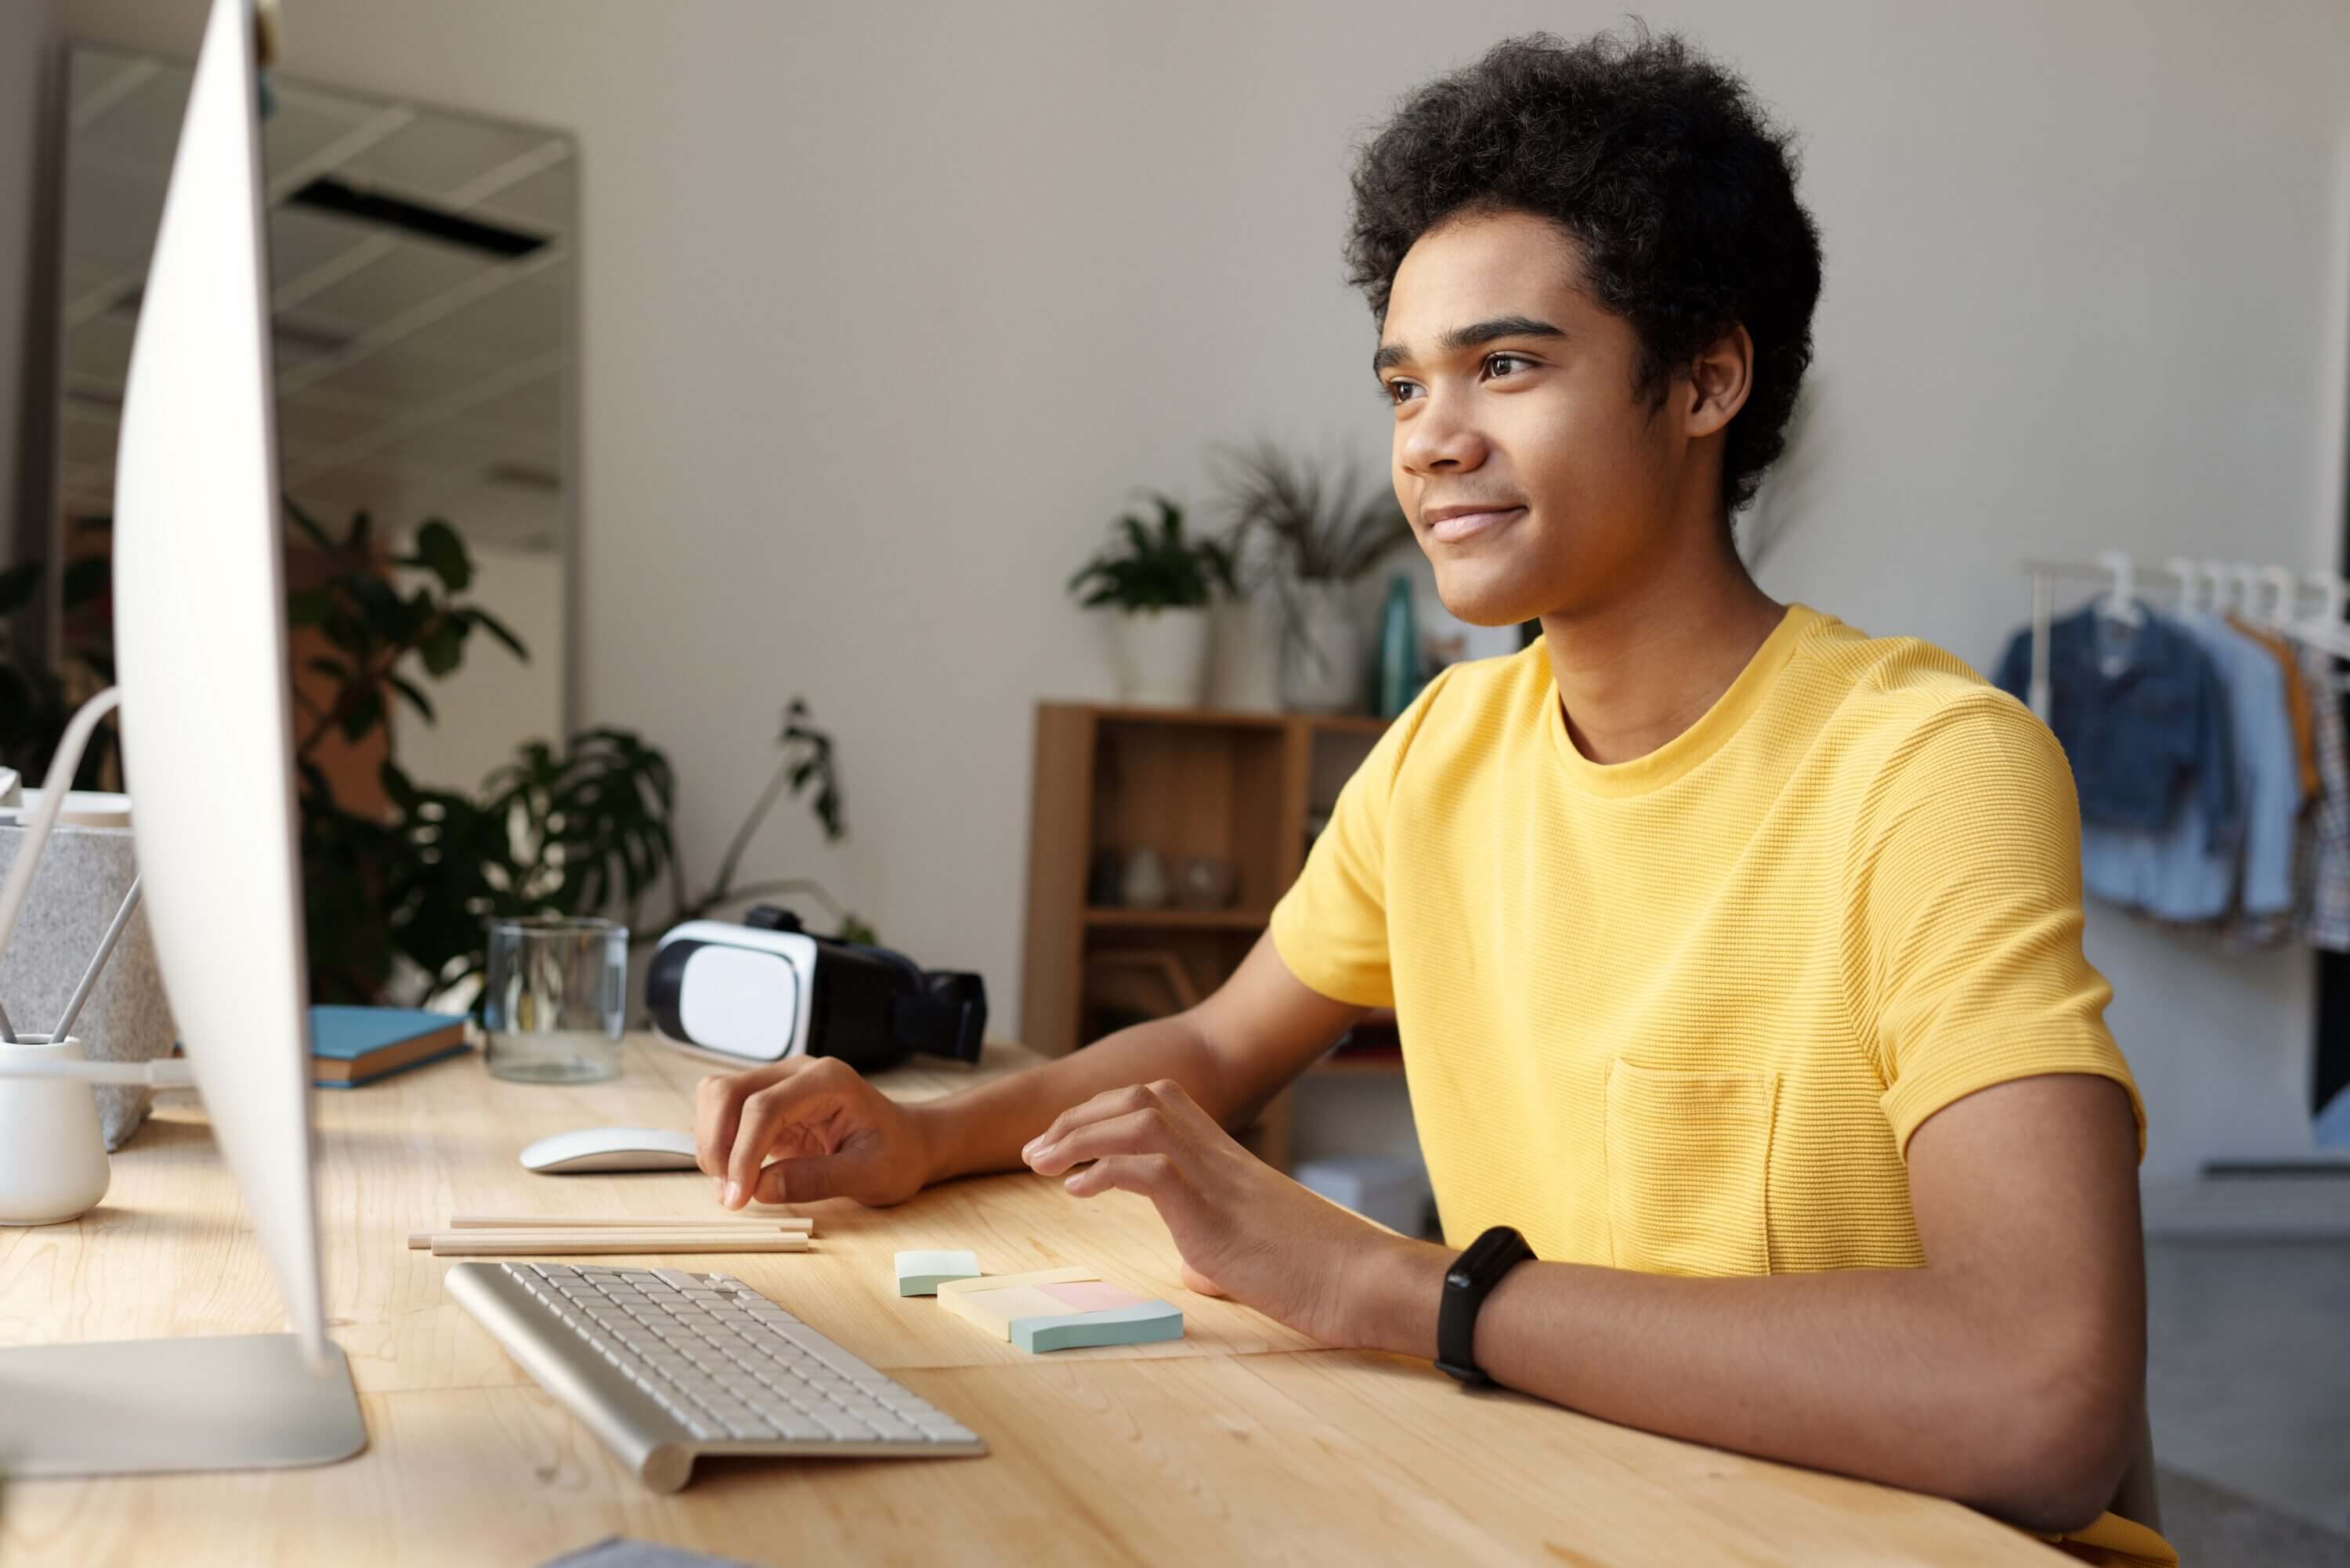 A teen male in a yellow shirt sits in front of his computer at home.